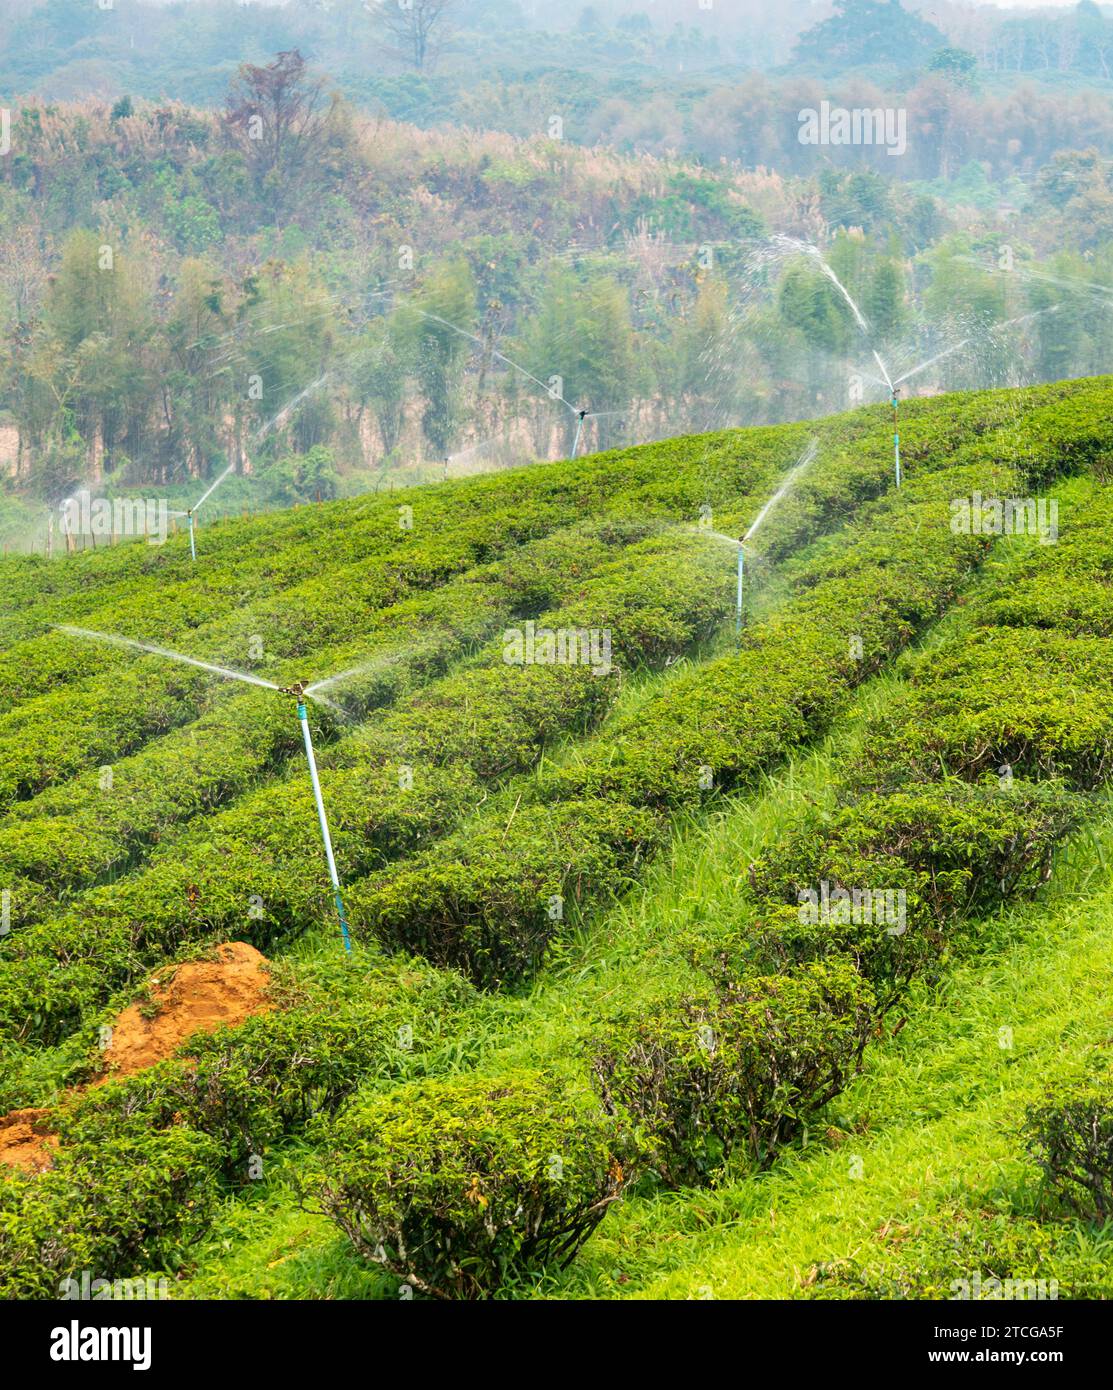 Hundreds of rows of lush Thai tea plants,regularily sprinkled with water to keep healthy,in one of Thailand's big tea growing areas. A hazy,smokey lan Stock Photo